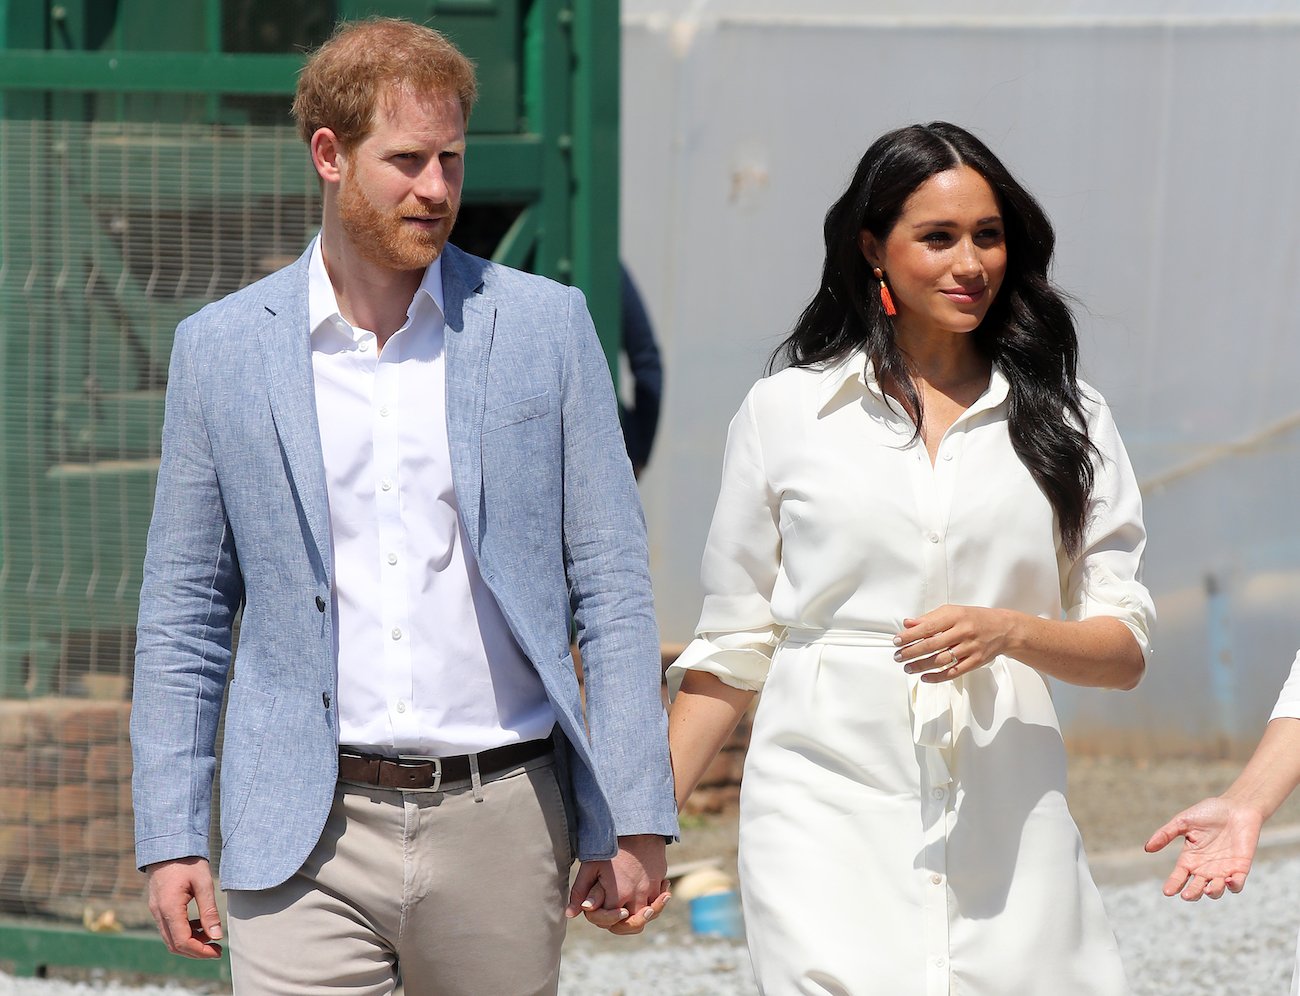 Prince Harry and Meghan Markle walk together and hold hands while Harry wears a light blue jacket and Meghan wears a white shirt dress